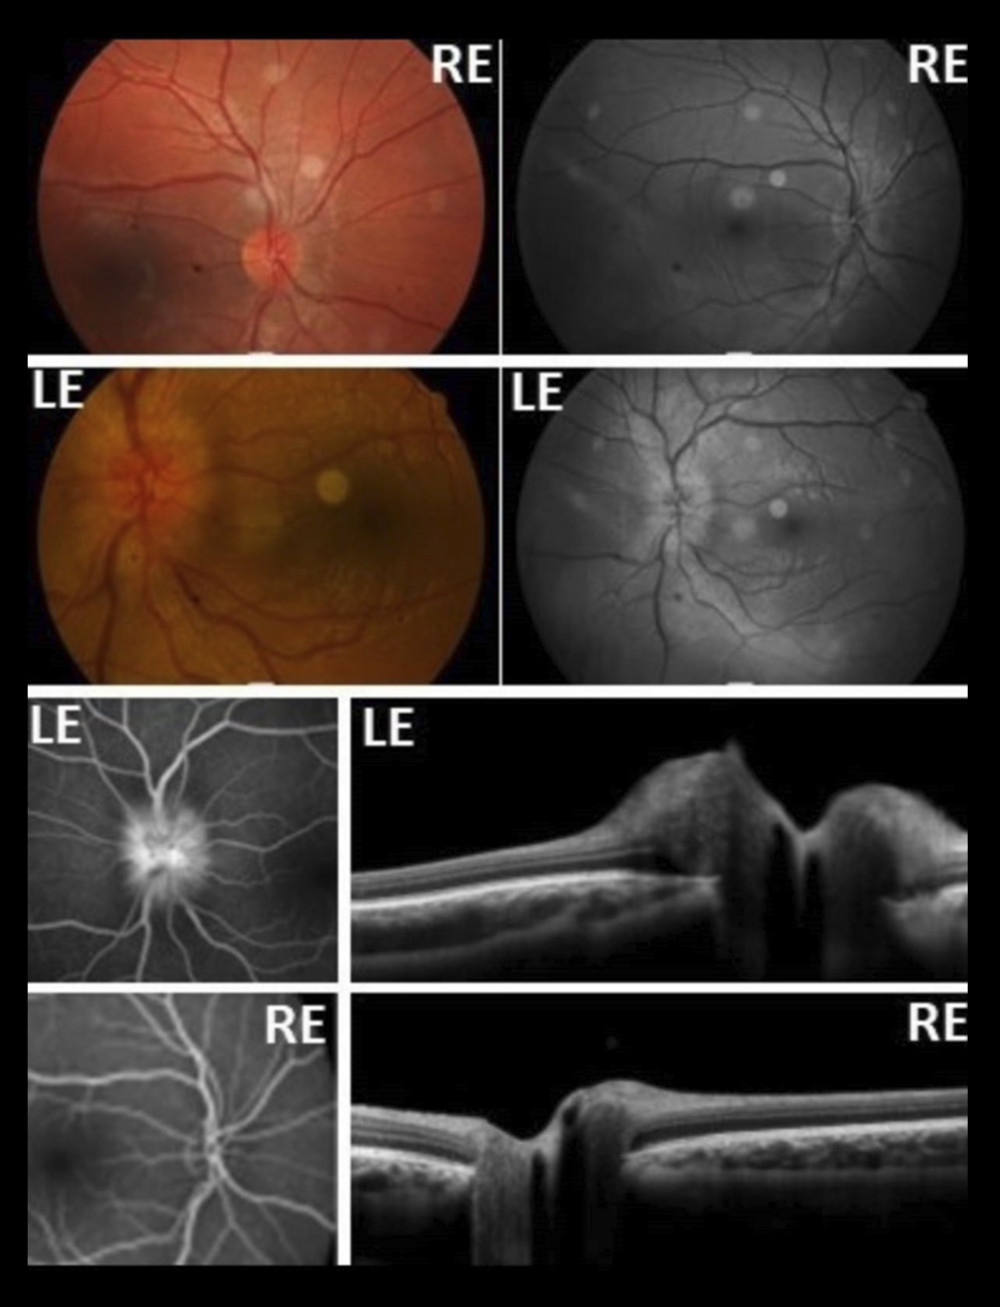 On retinography, papillary edema was only evident in the left eye (LE). Fluorescent angiography revealed hyperfluorescence with defocusing of the papilla in the LE, but in the right eye (RE) there was no change. Optical coherence tomography of the optic nerve quantitatively detected bilateral papillary edema (mild in the RE and severe in the LE).